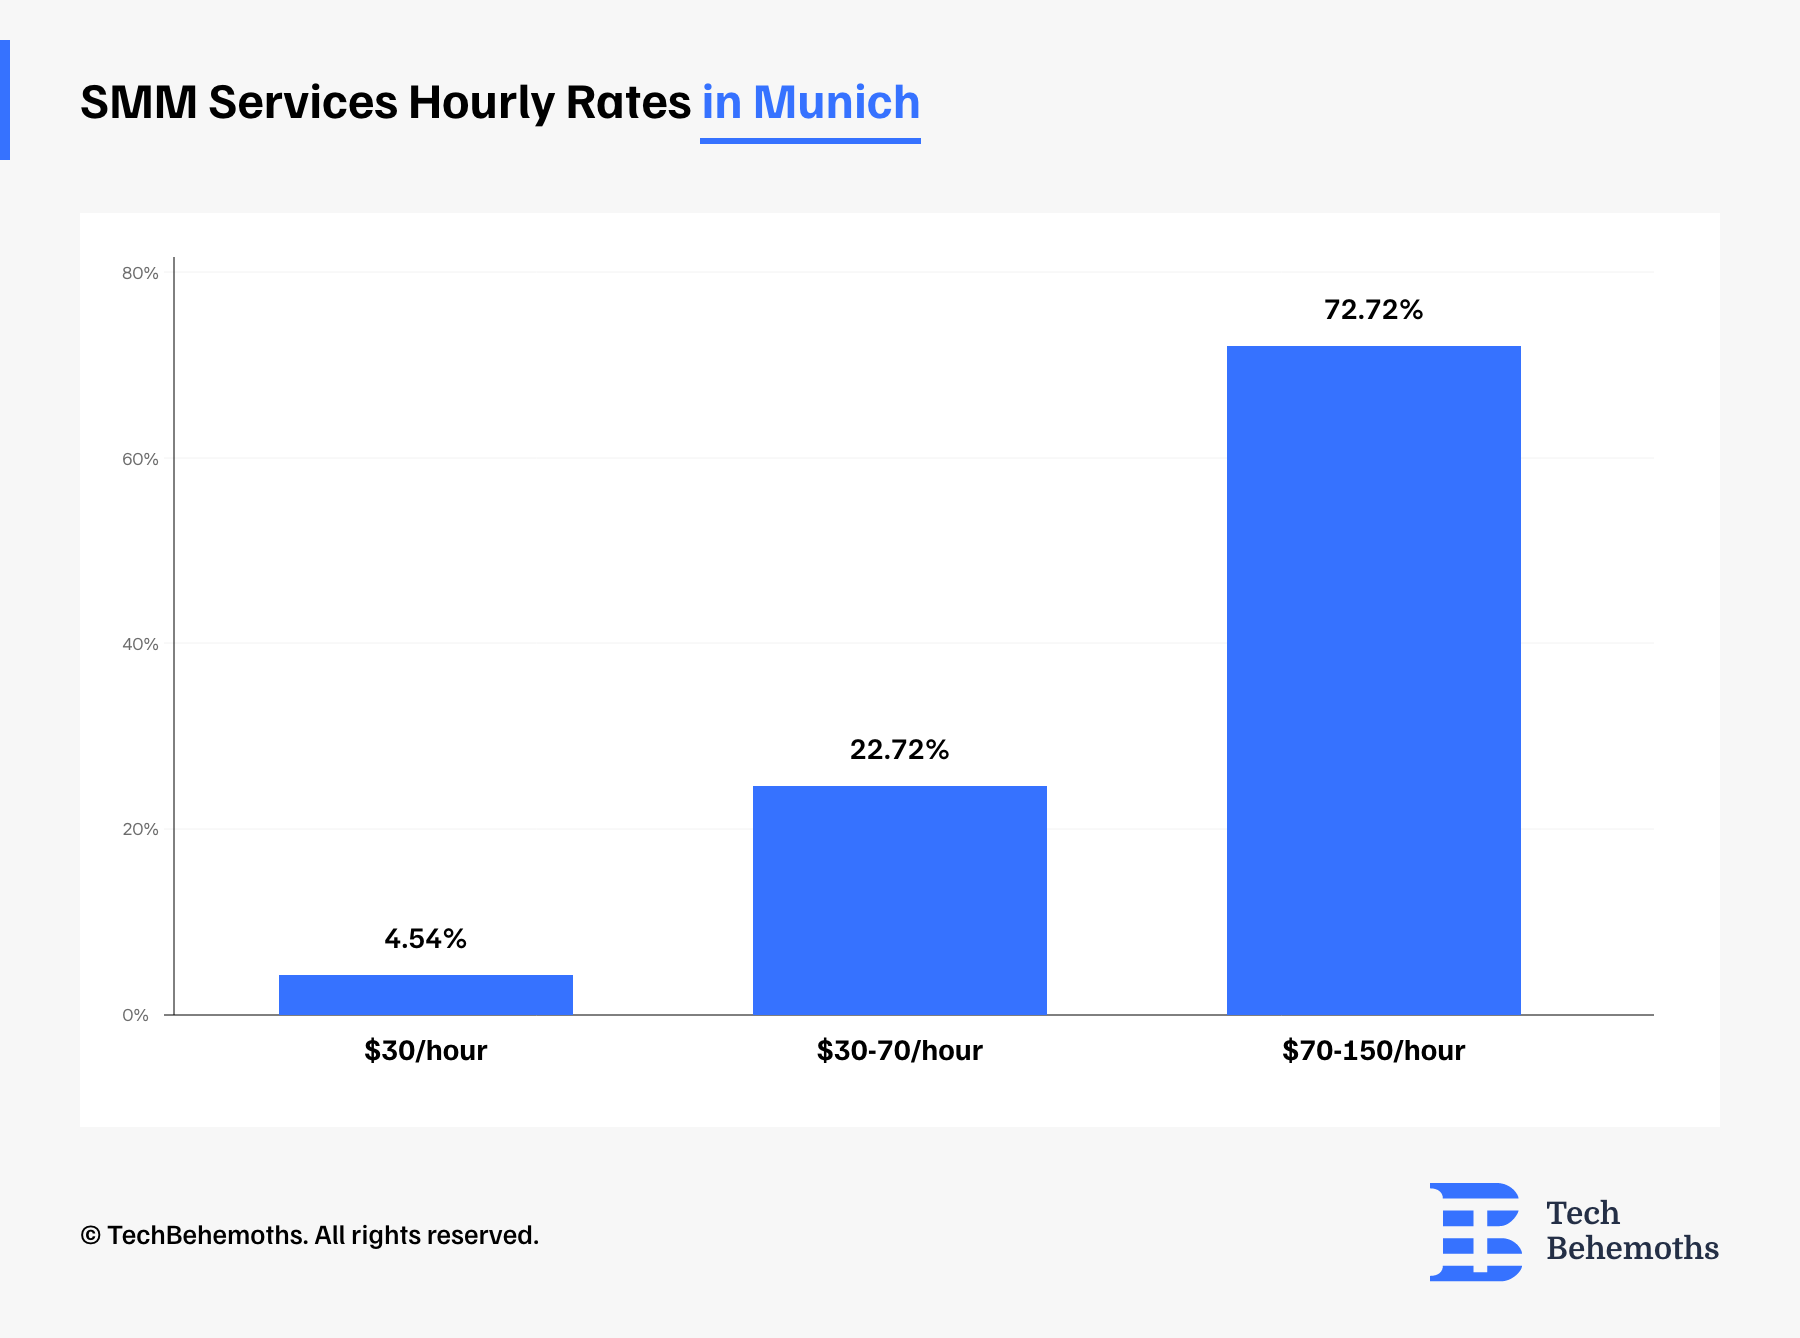 SMM services hourly rates in Munich